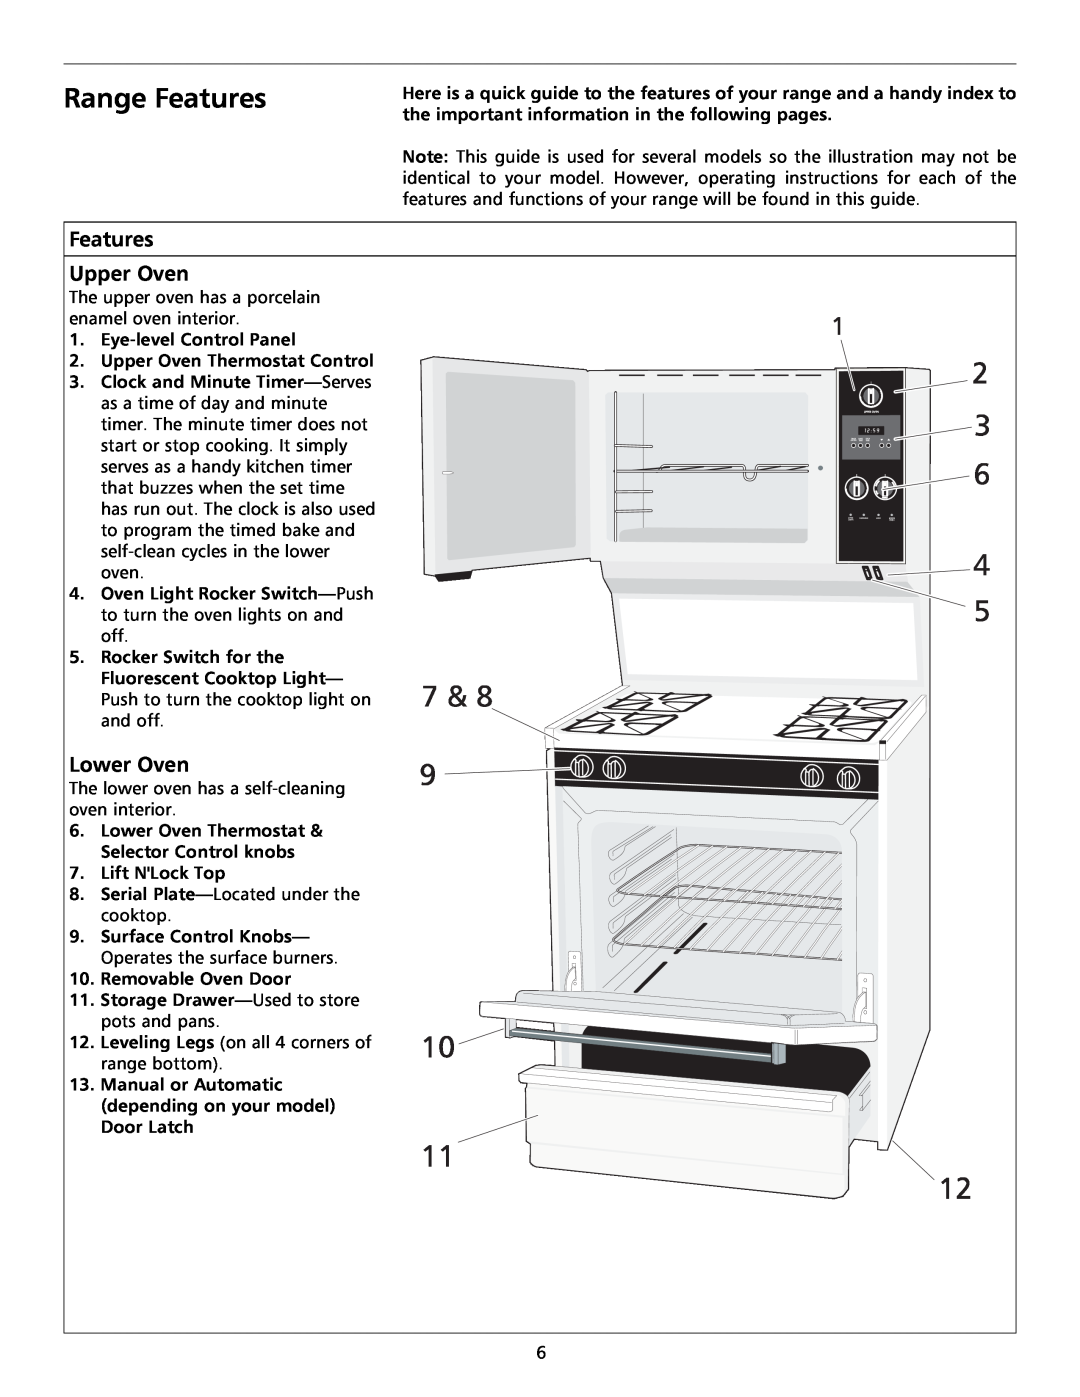 Tappan 316000191 manual Range Features, Features Upper Oven, Lower Oven 